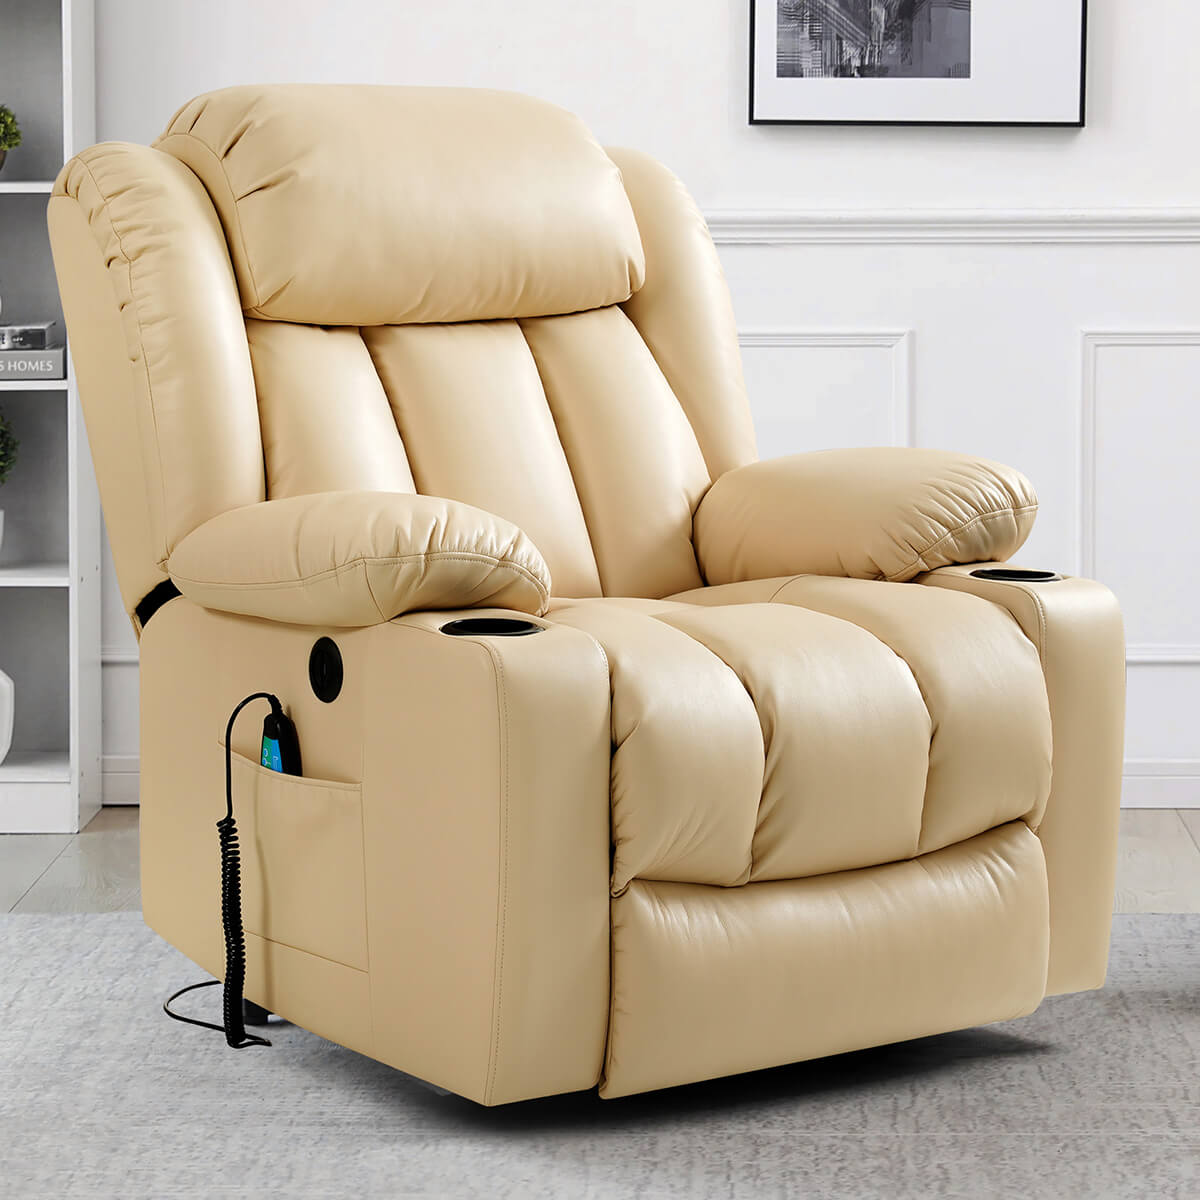 Soulout Luxury Lift Recliner Chairs With Massage and Heating, Beige